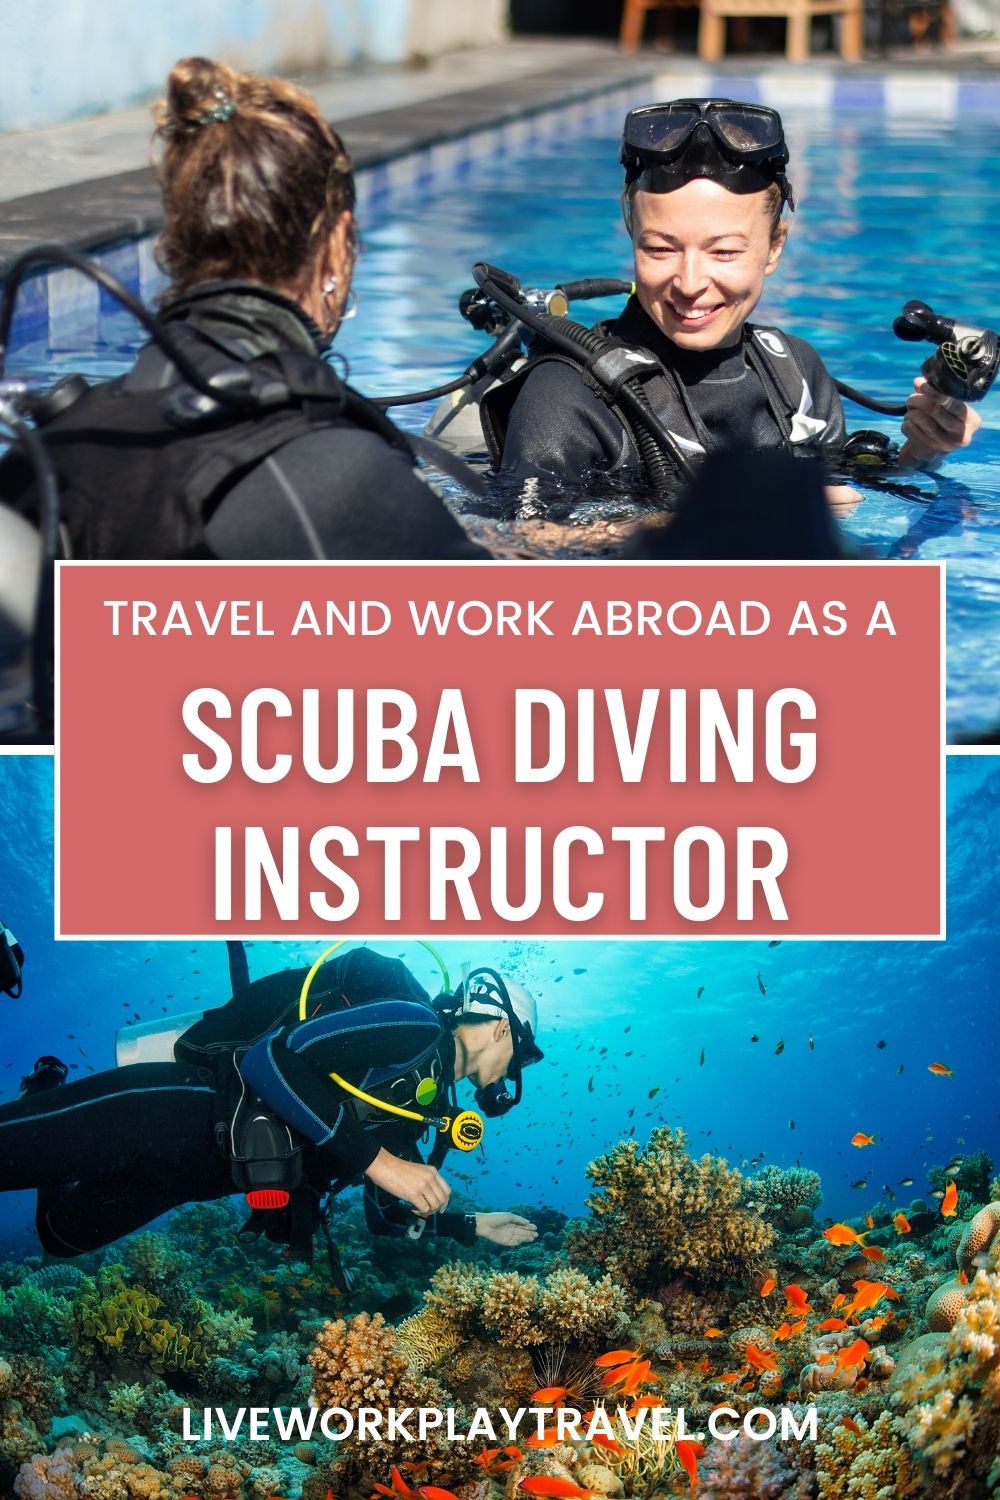 People scuba diving instructors under the sea with beautiful orange coloured fish.